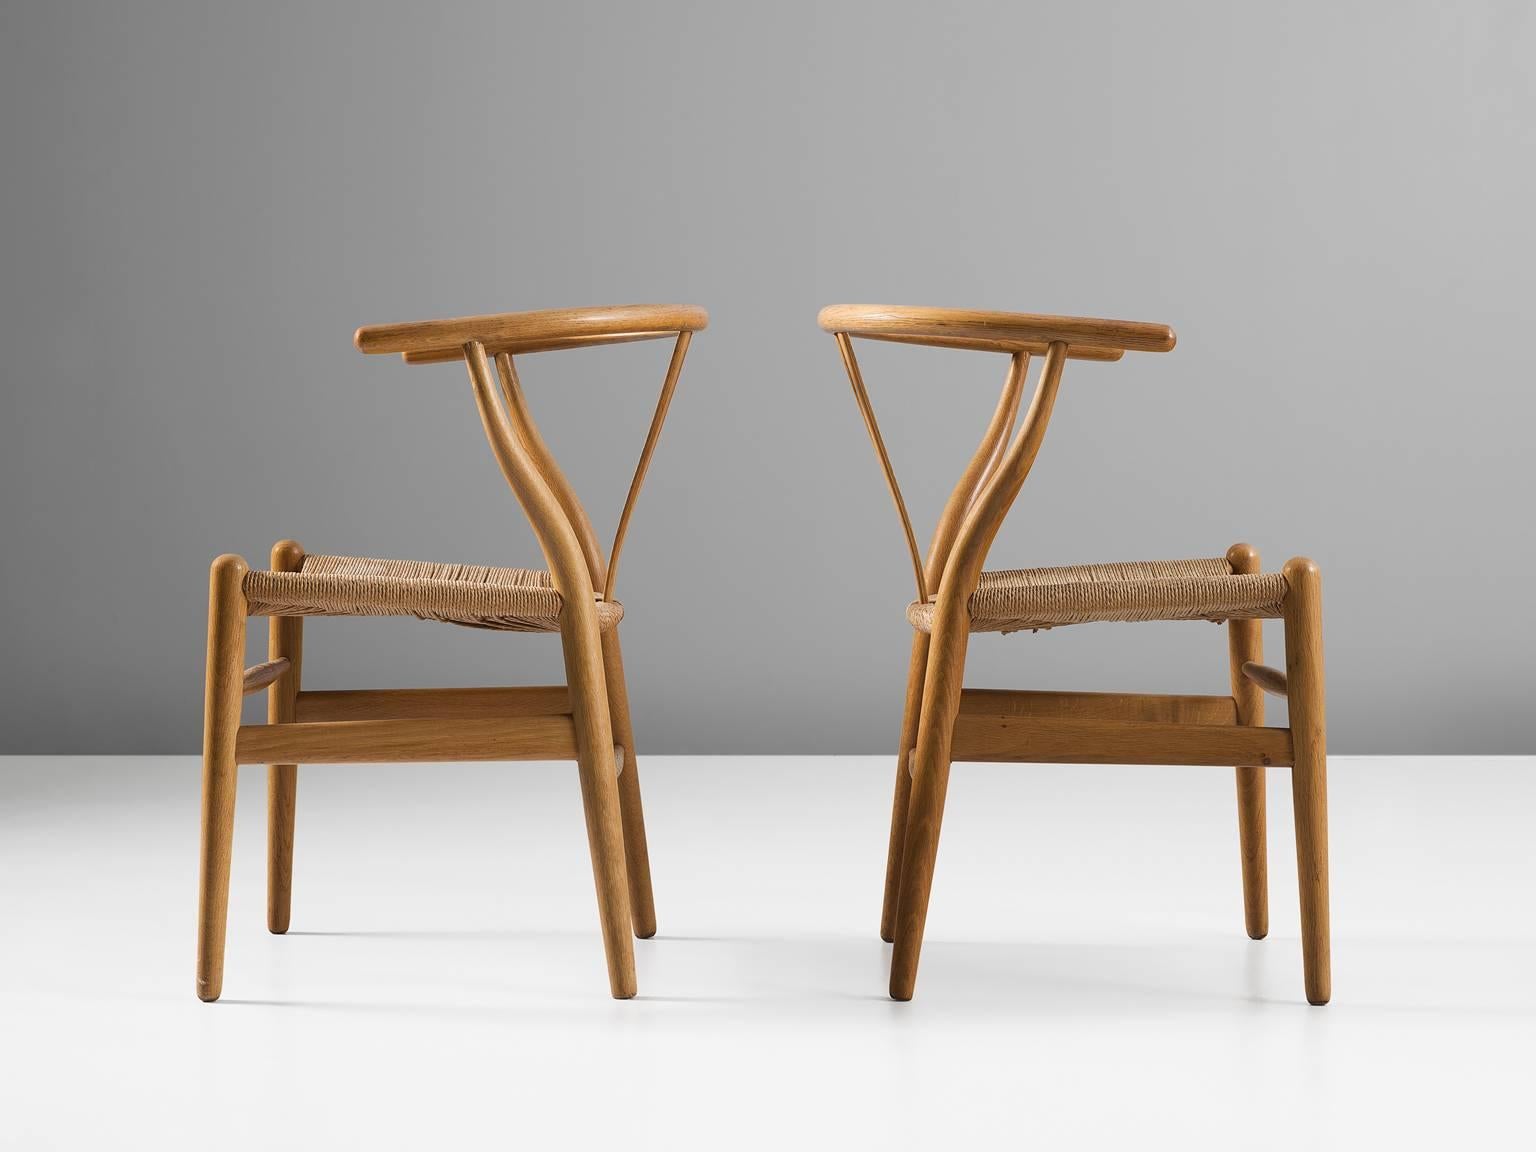 CH24 Y-chairs, oak, rope, Denmark.

The Wishbone chair, officially named CH24 is designed by Hans J. Wegner (1914-2007) in 1949 and produced since 1950 by Carl Hansen. At first, the chair was not that popular. Only a few furniture dealers were